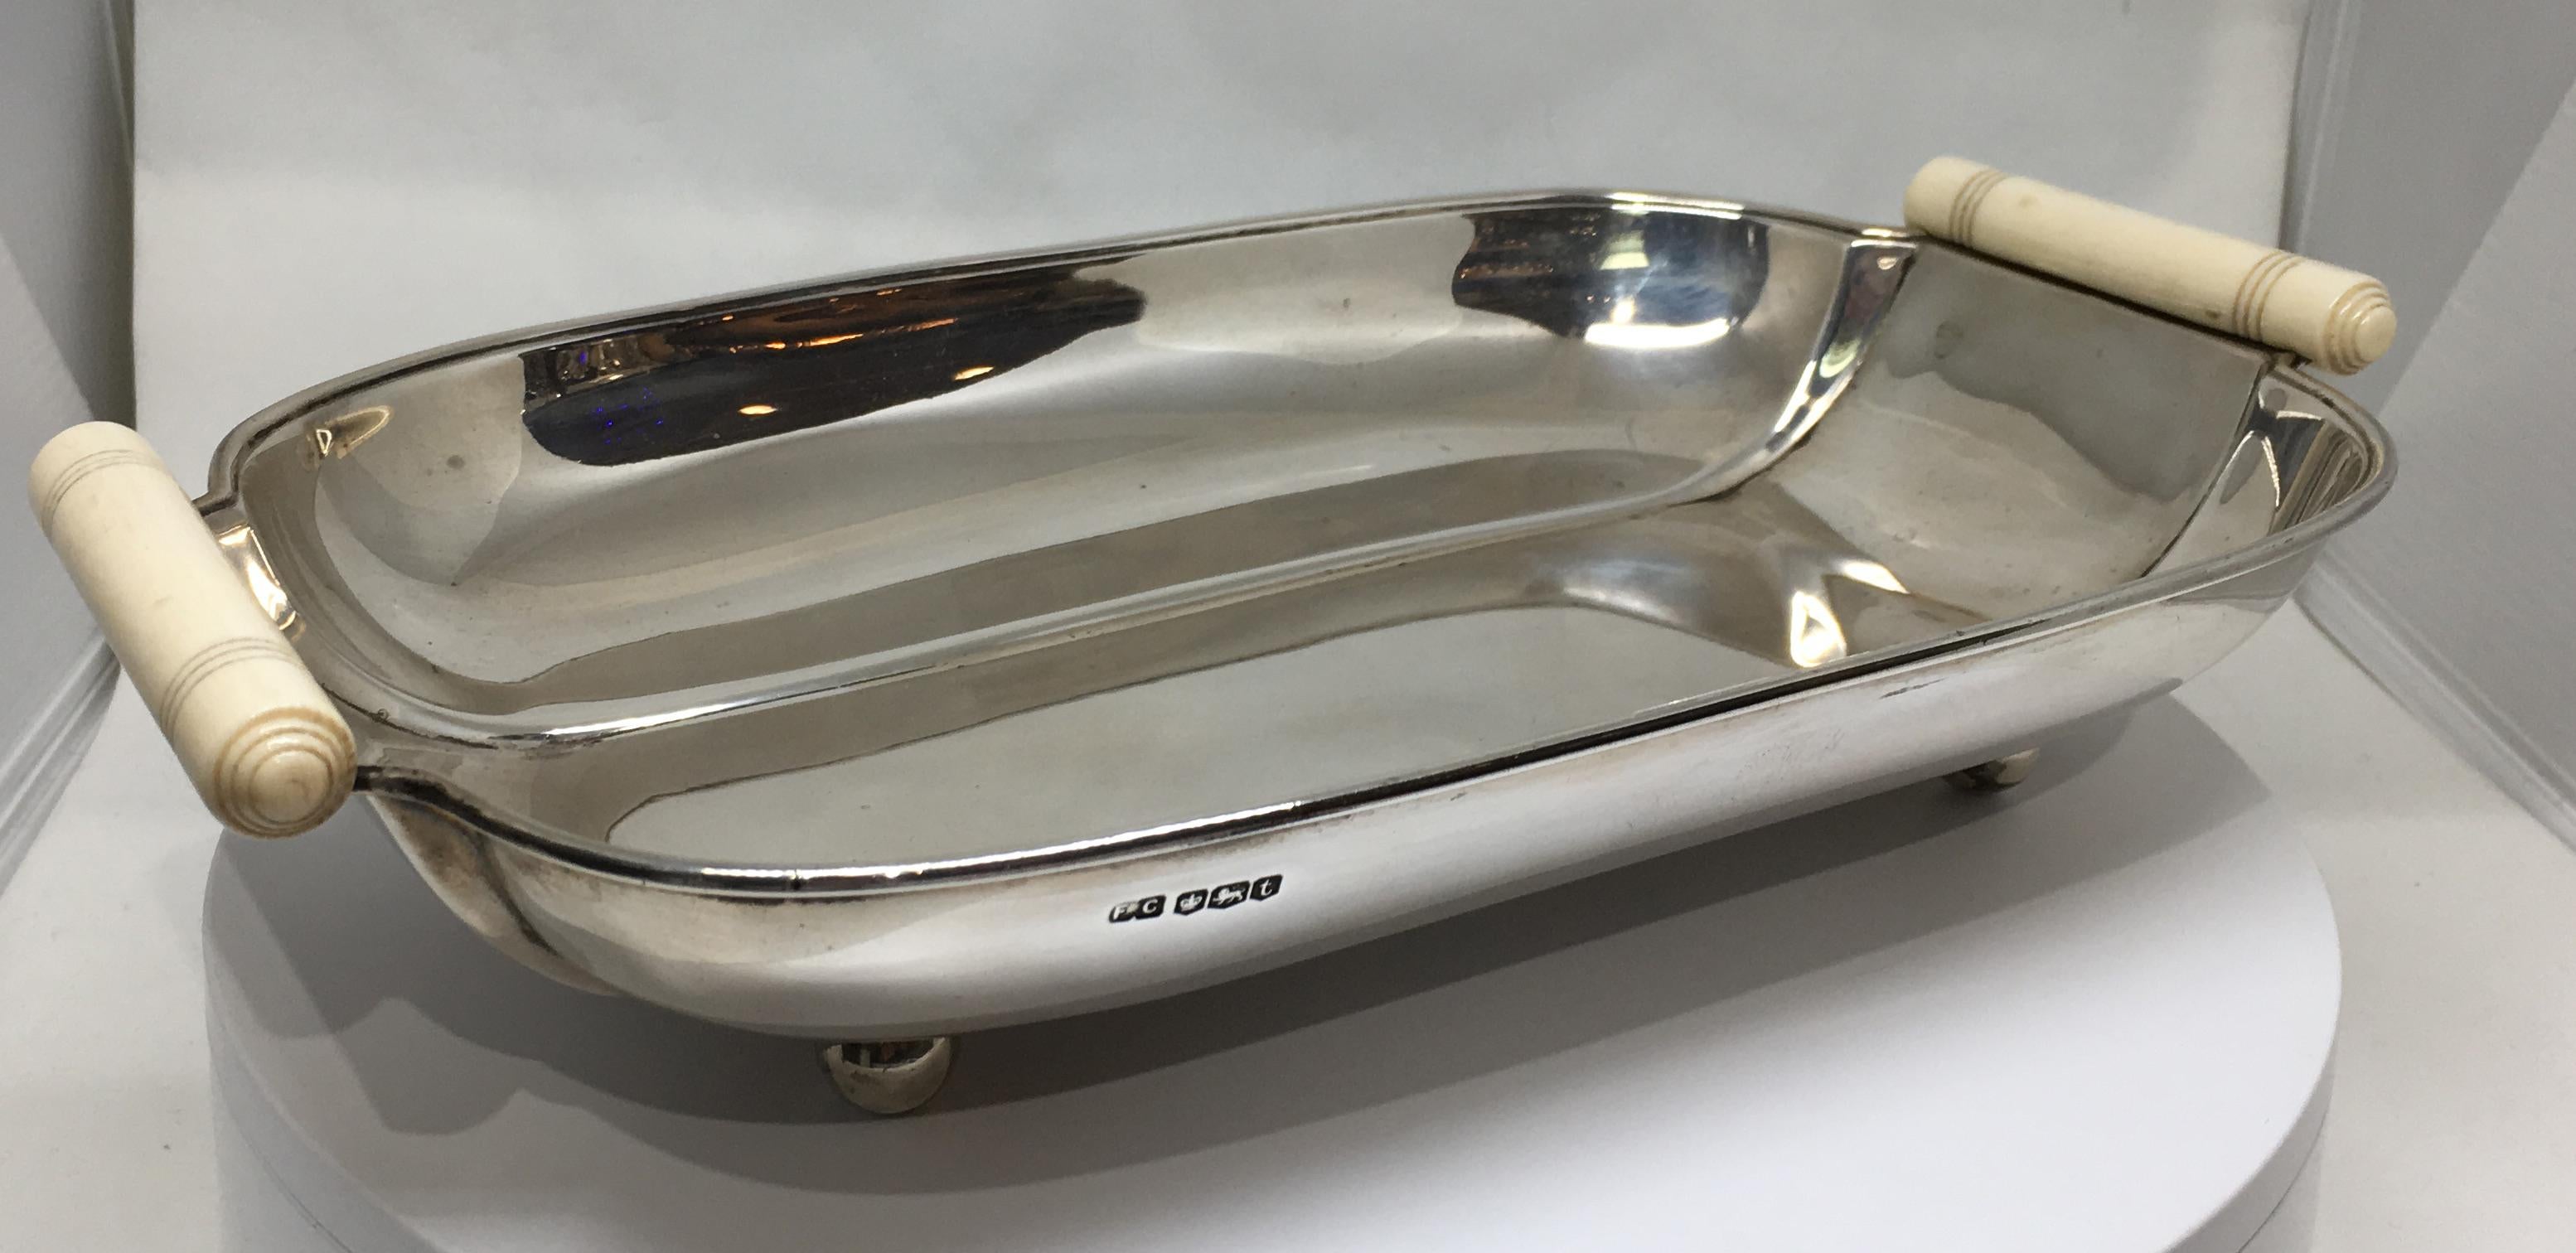 A gorgeous Art Deco sterling silver and carved bone tray / fruit bowl on four silver ball feet.

Dated for Sheffield 1936 and in superb condition.

The tray measures 10 5/8 inches wide, 6 1/2 inches deep and 2 1/2 inches high.